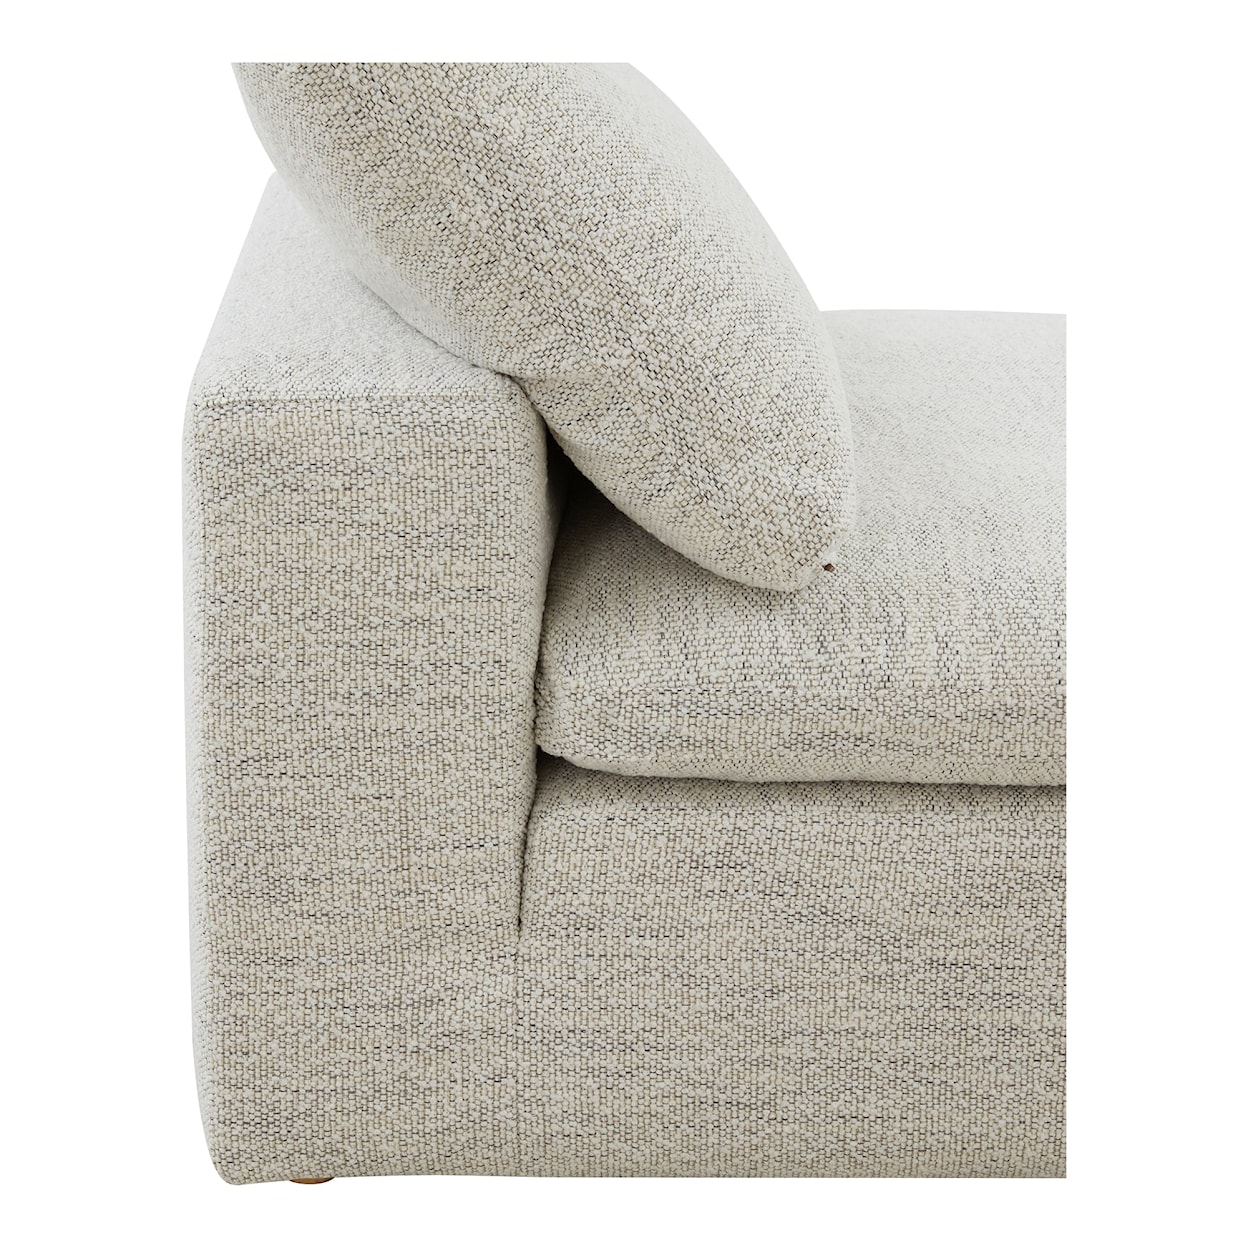 Moe's Home Collection Clay Slipper Chair